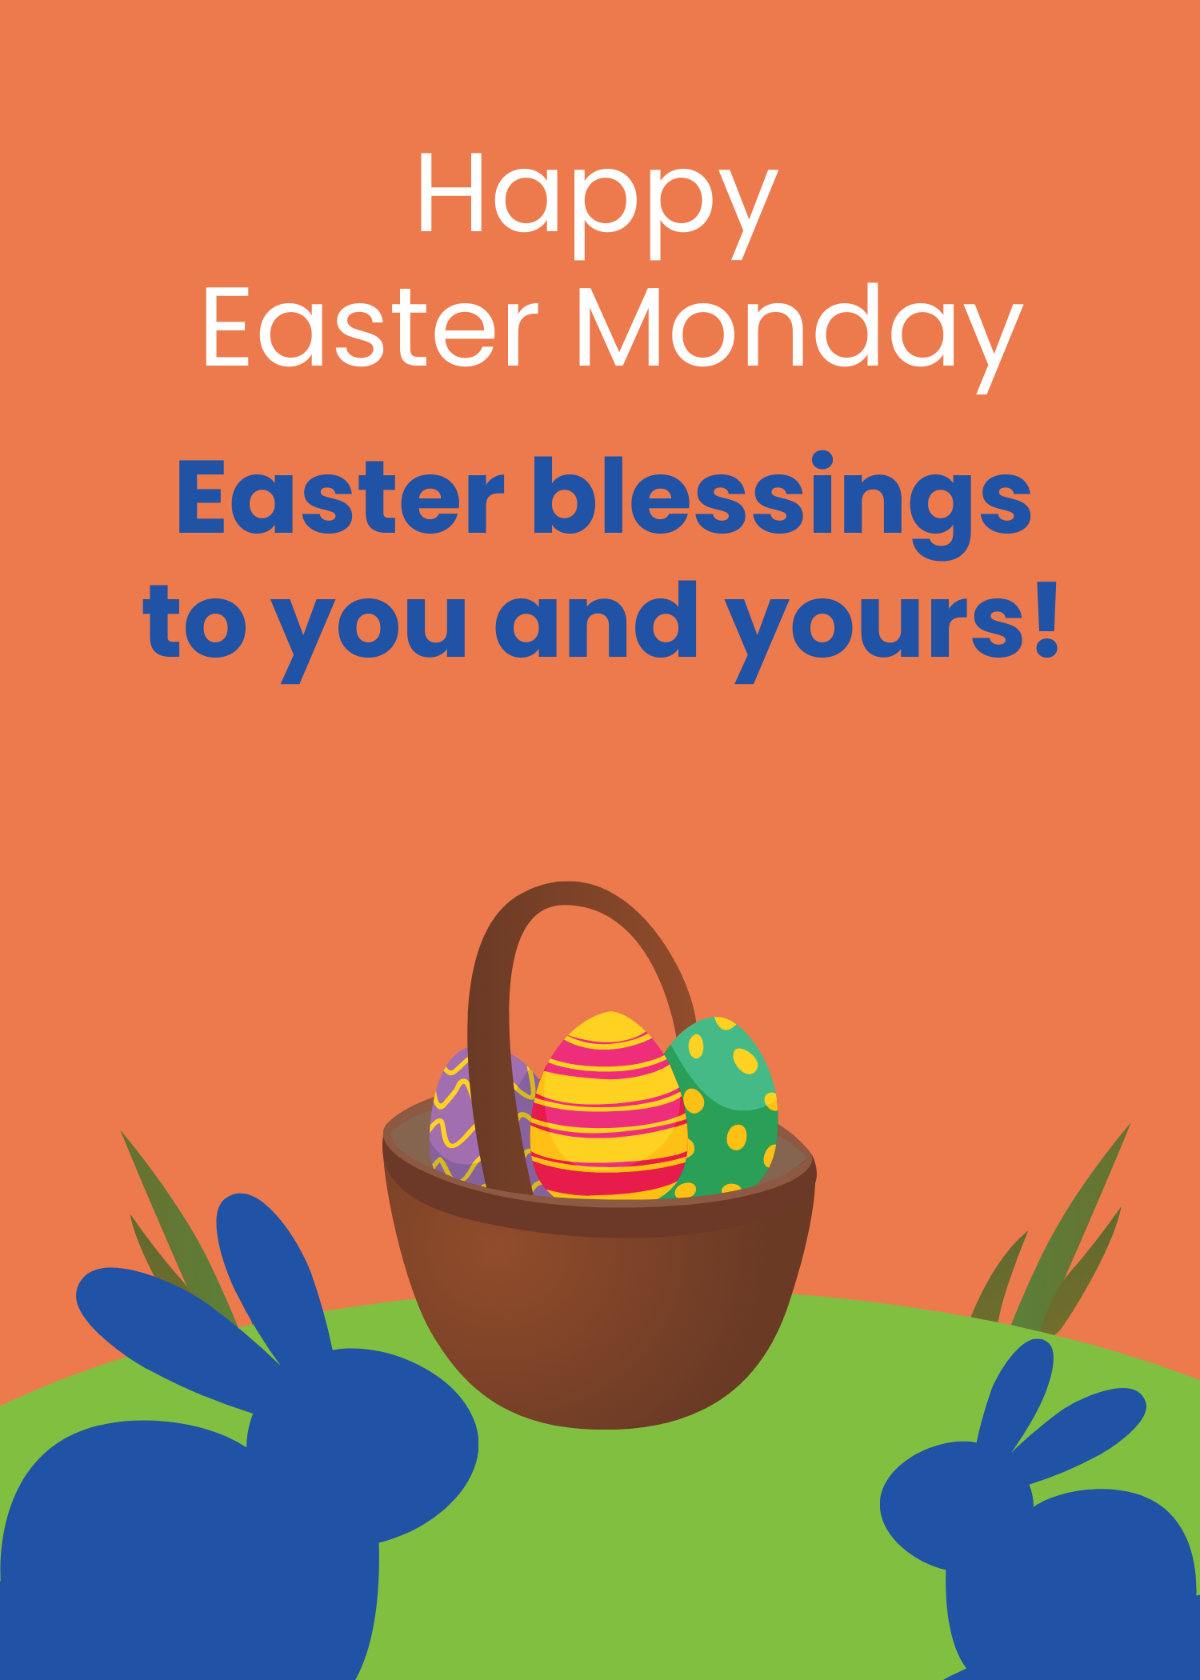 Easter Monday Greeting Card